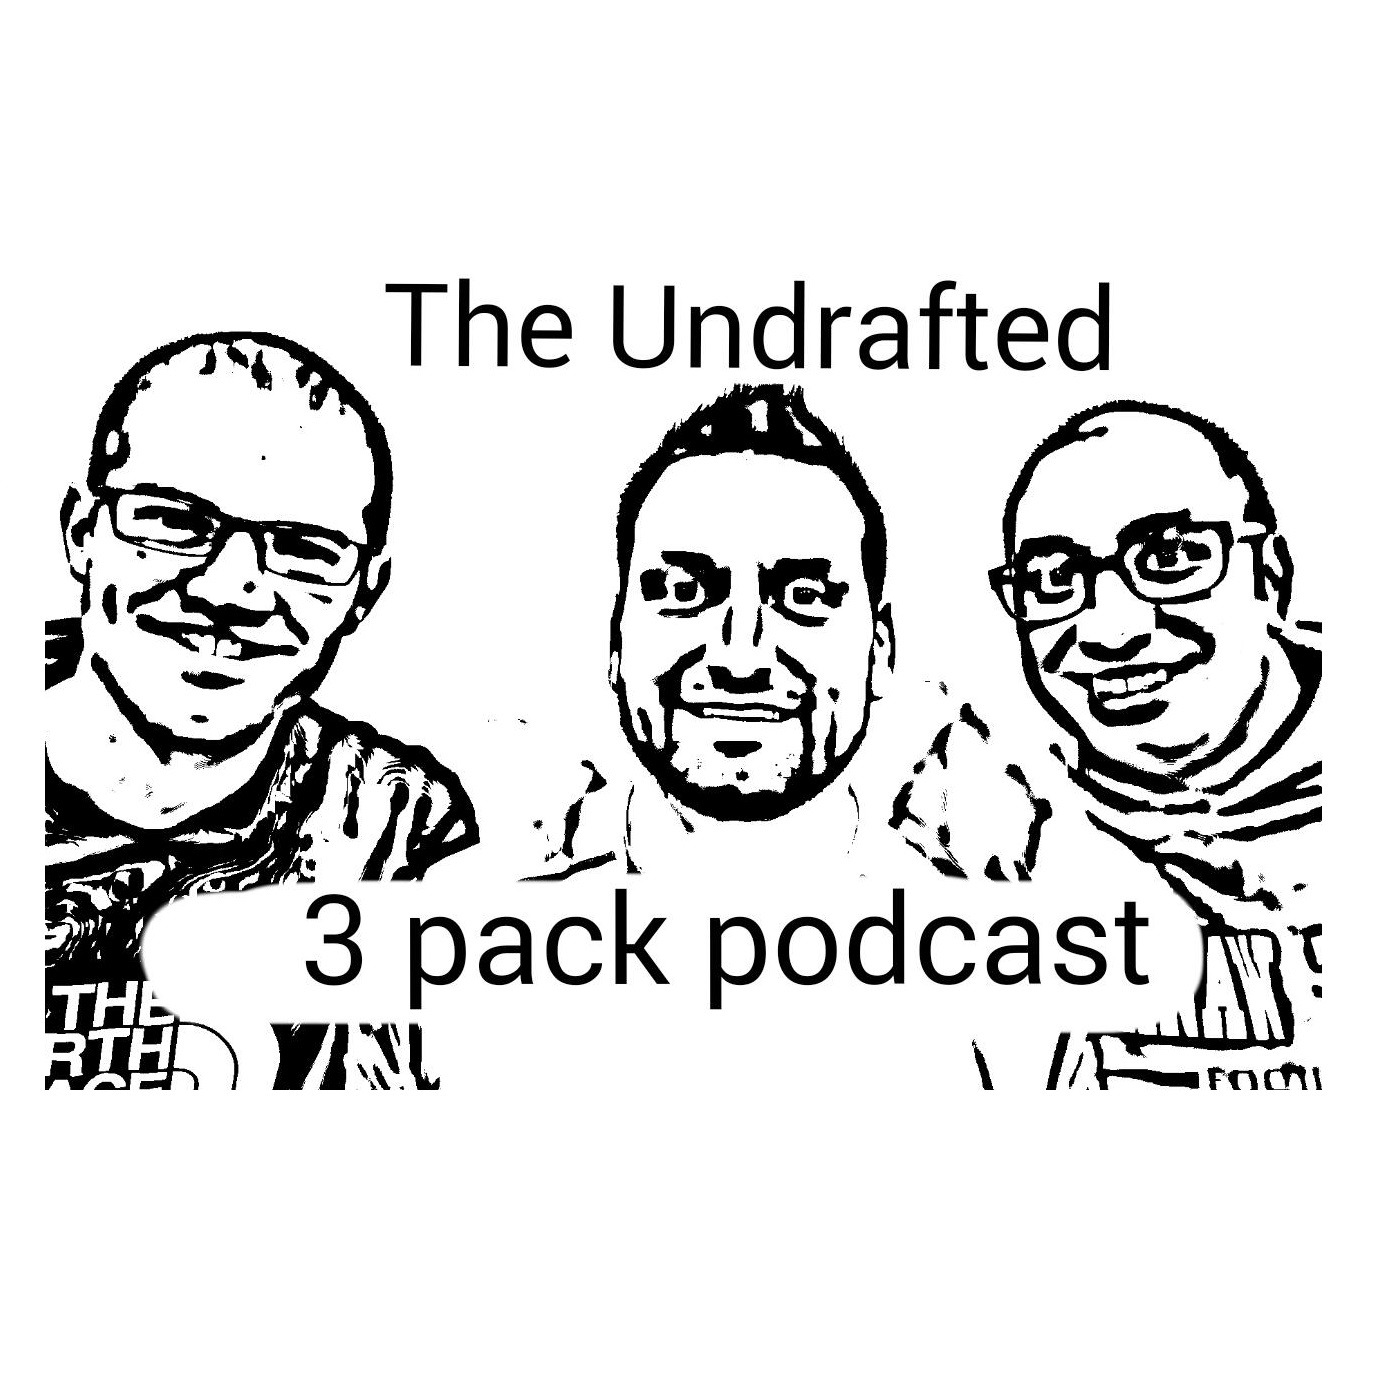 Ep. 6: The Undrafted 3 Pack